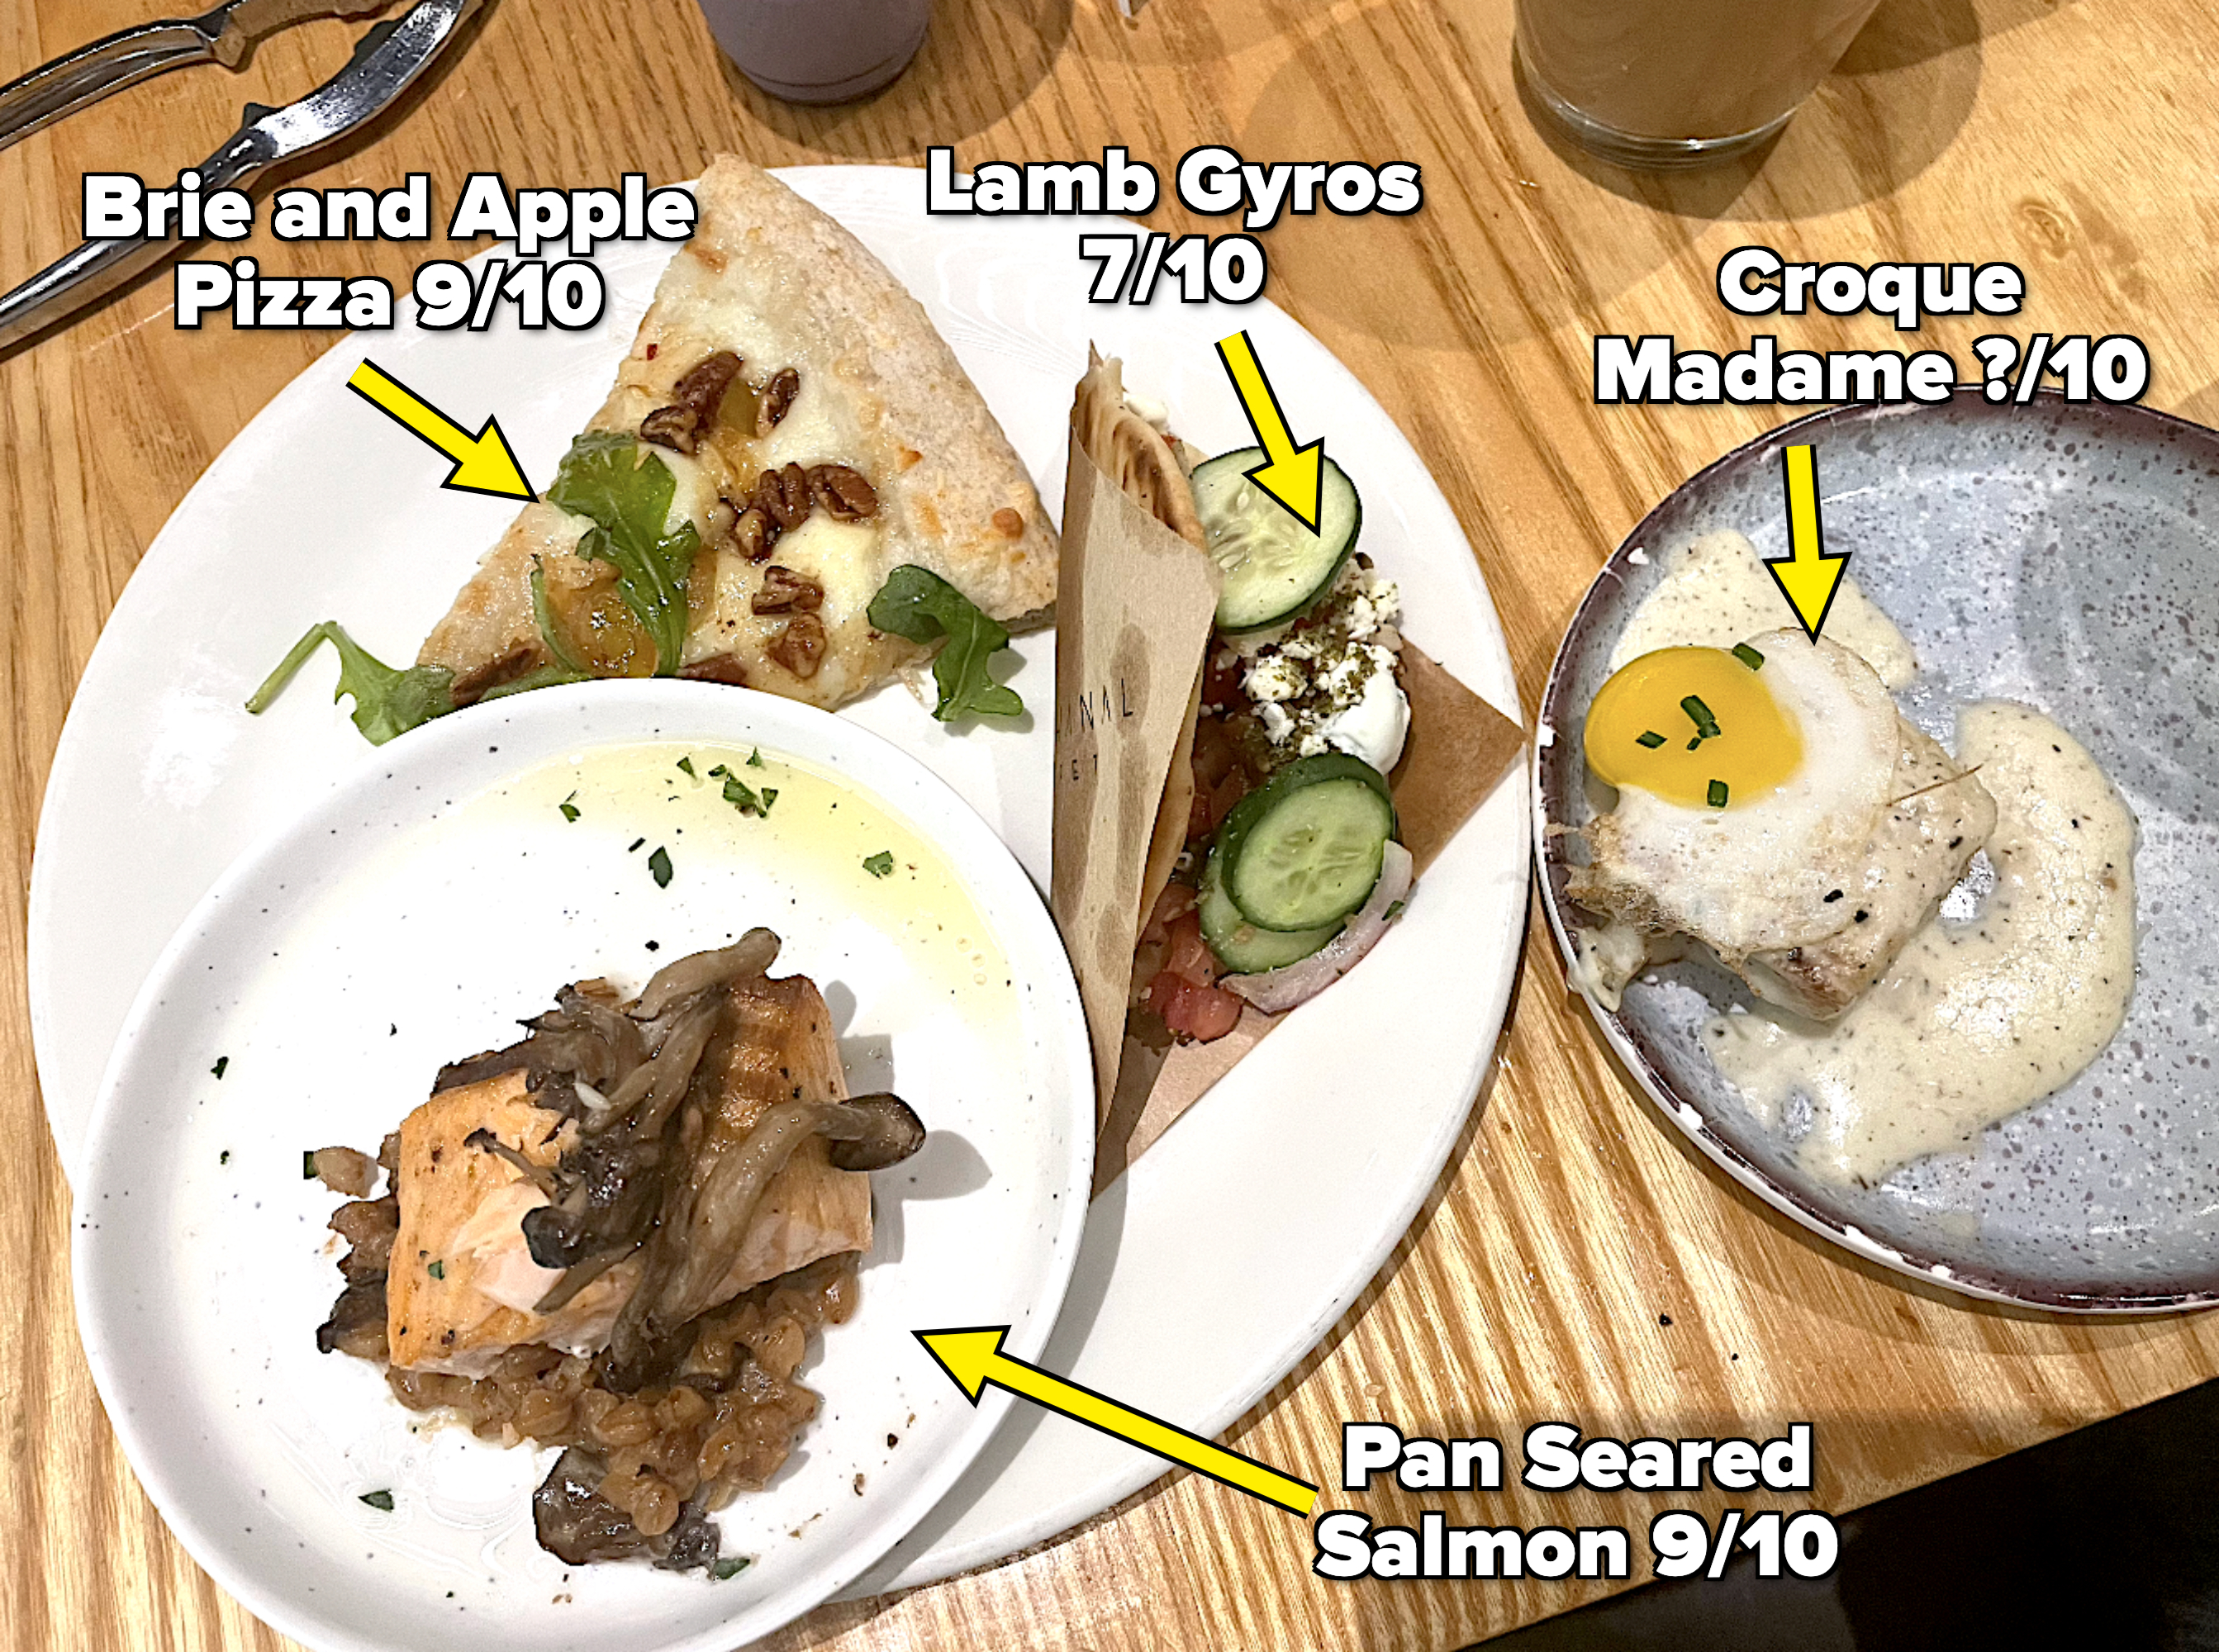 A plate full of food with arrows pointing to each item and providing ratings; the lowest rating is a 7 and the highest is a 9